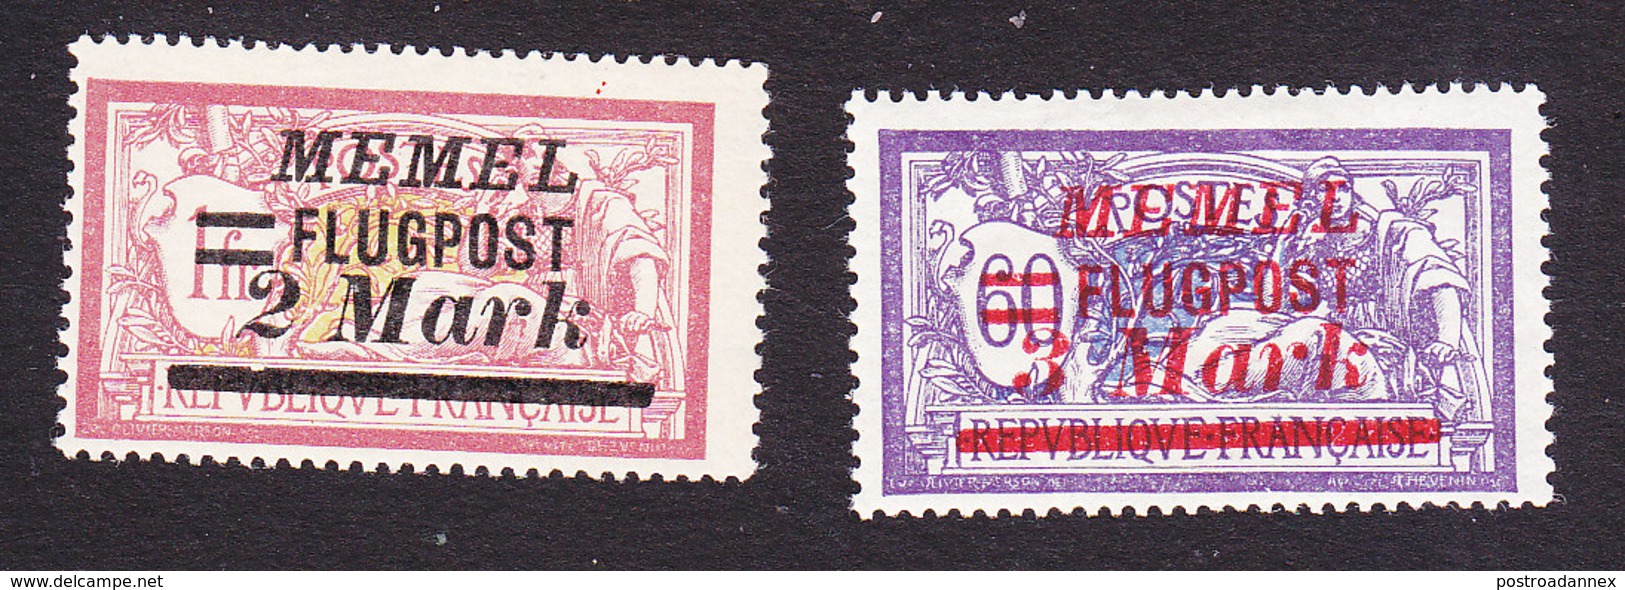 Memel. Scott #C24-C25, Mint Hinged, French Stamp Surcharged, Issued 1922 - Unused Stamps